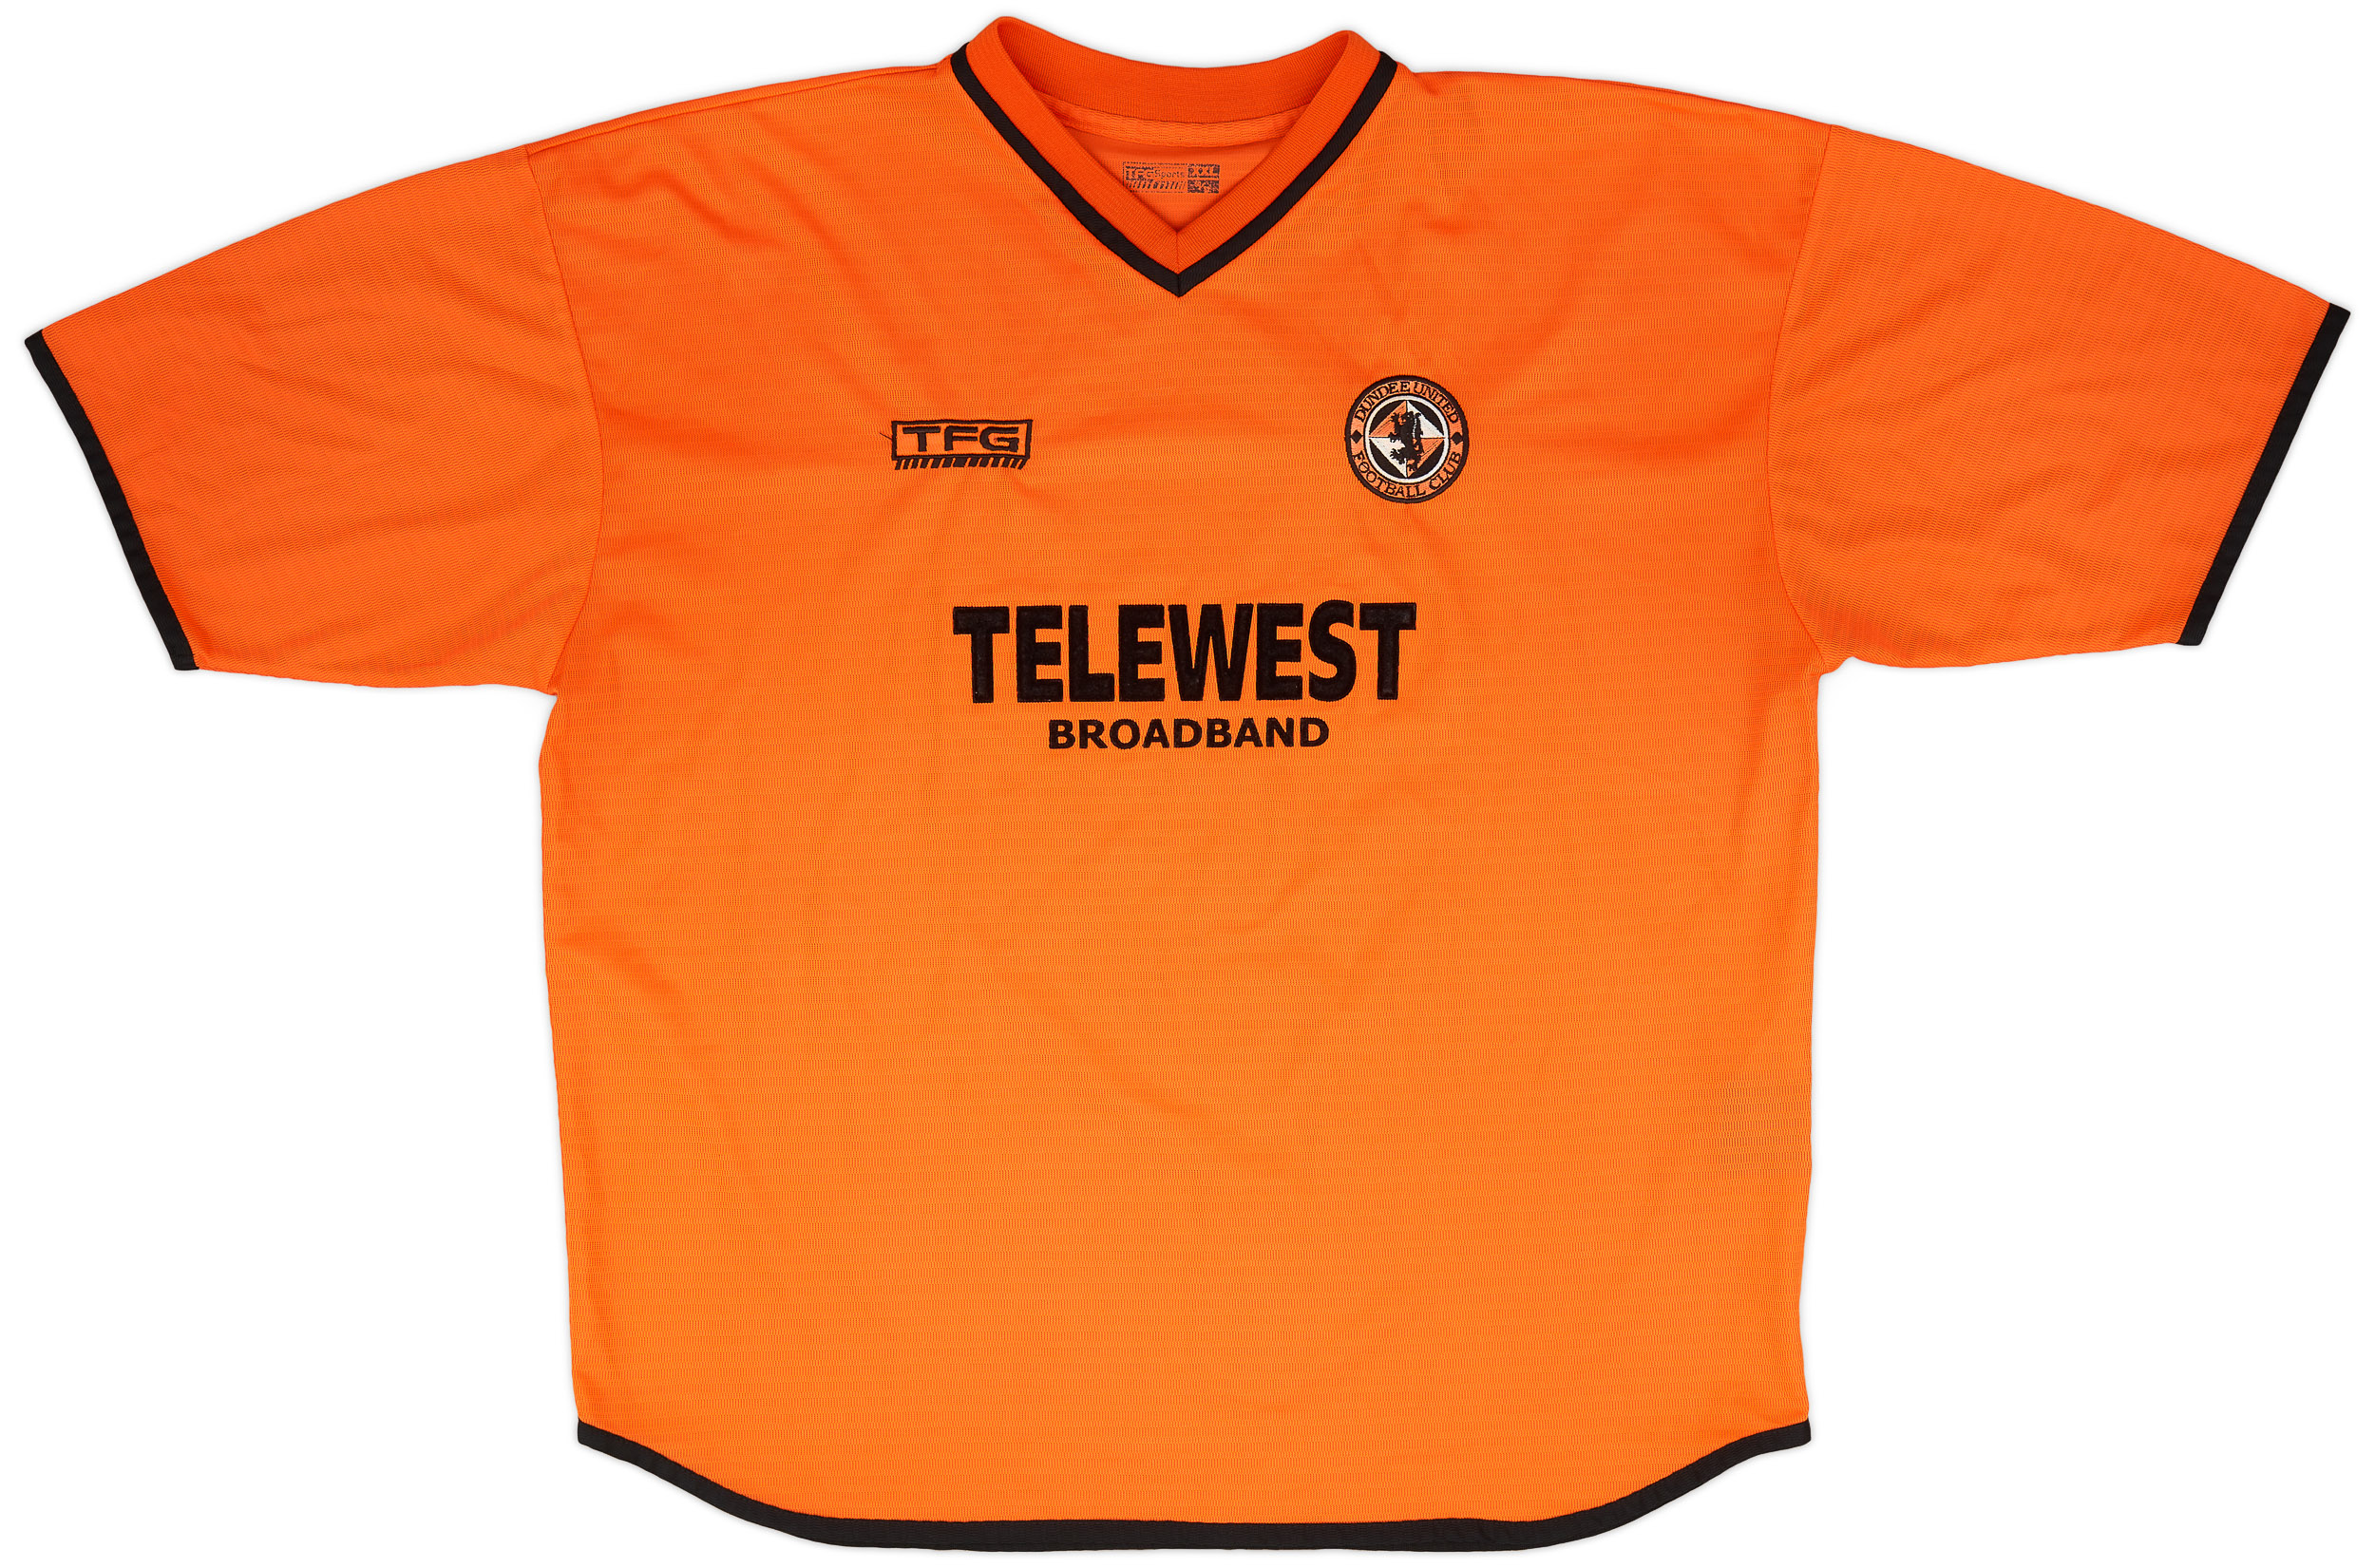 2001-02 Dundee United Home Shirt - 9/10 - ()